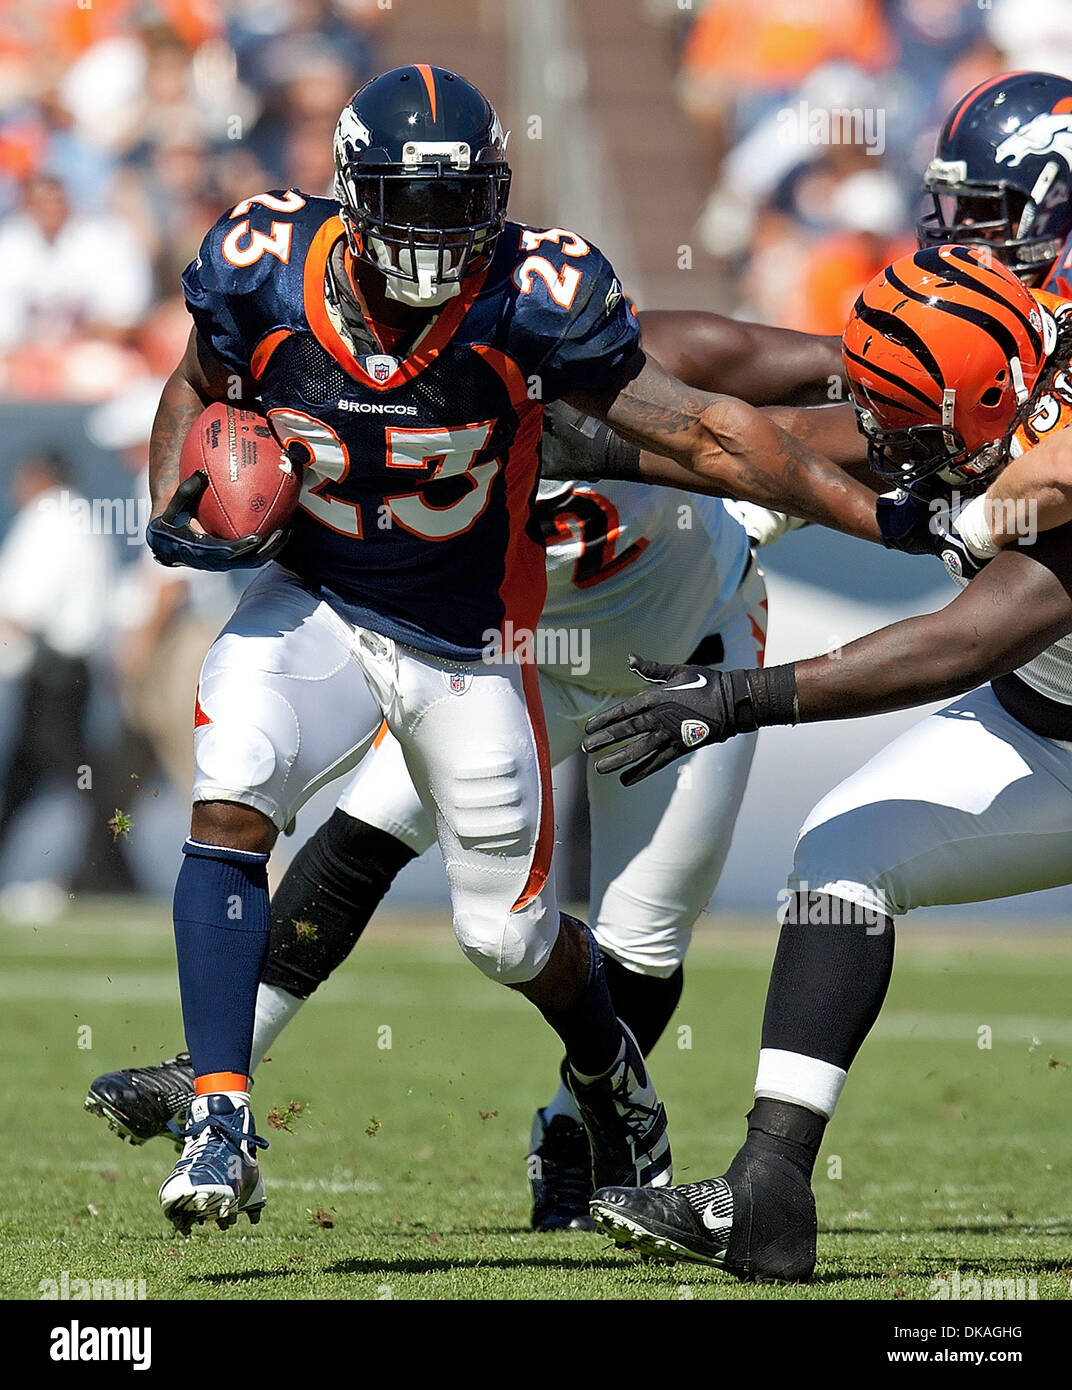 Broncos RB Willis McGahee has been exception to the rules – The Denver Post